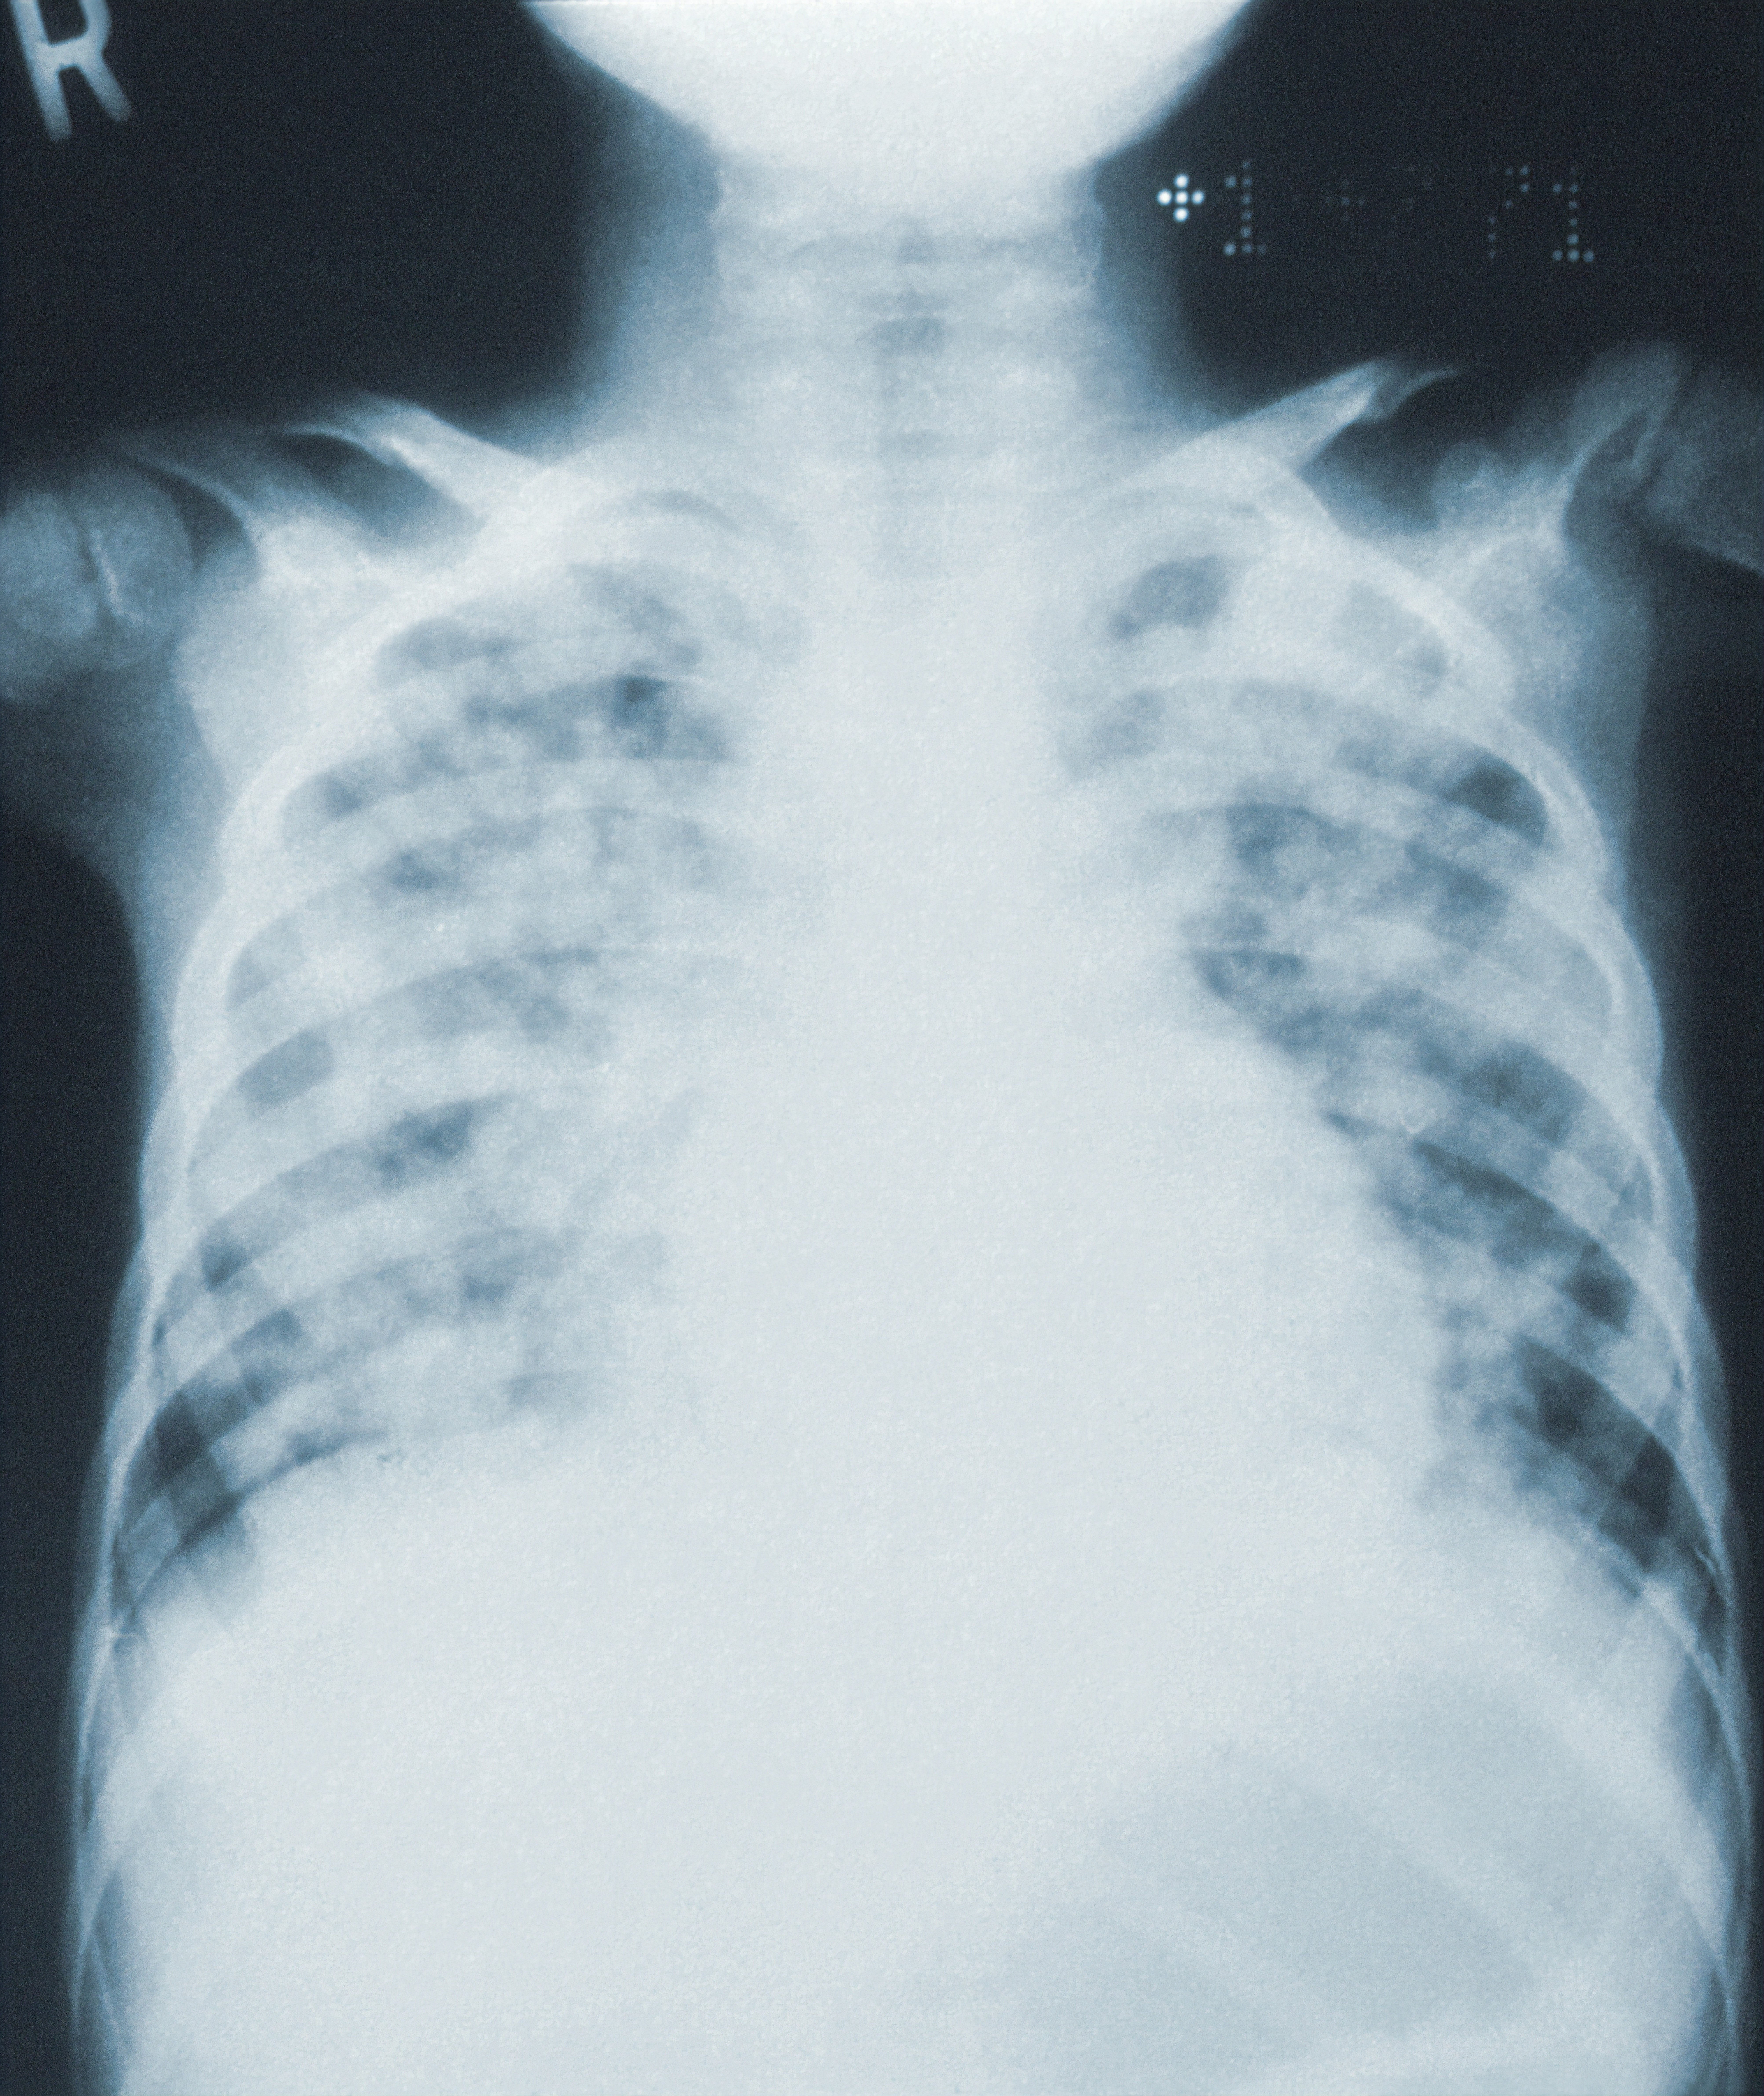 X-ray image of the chest of a person